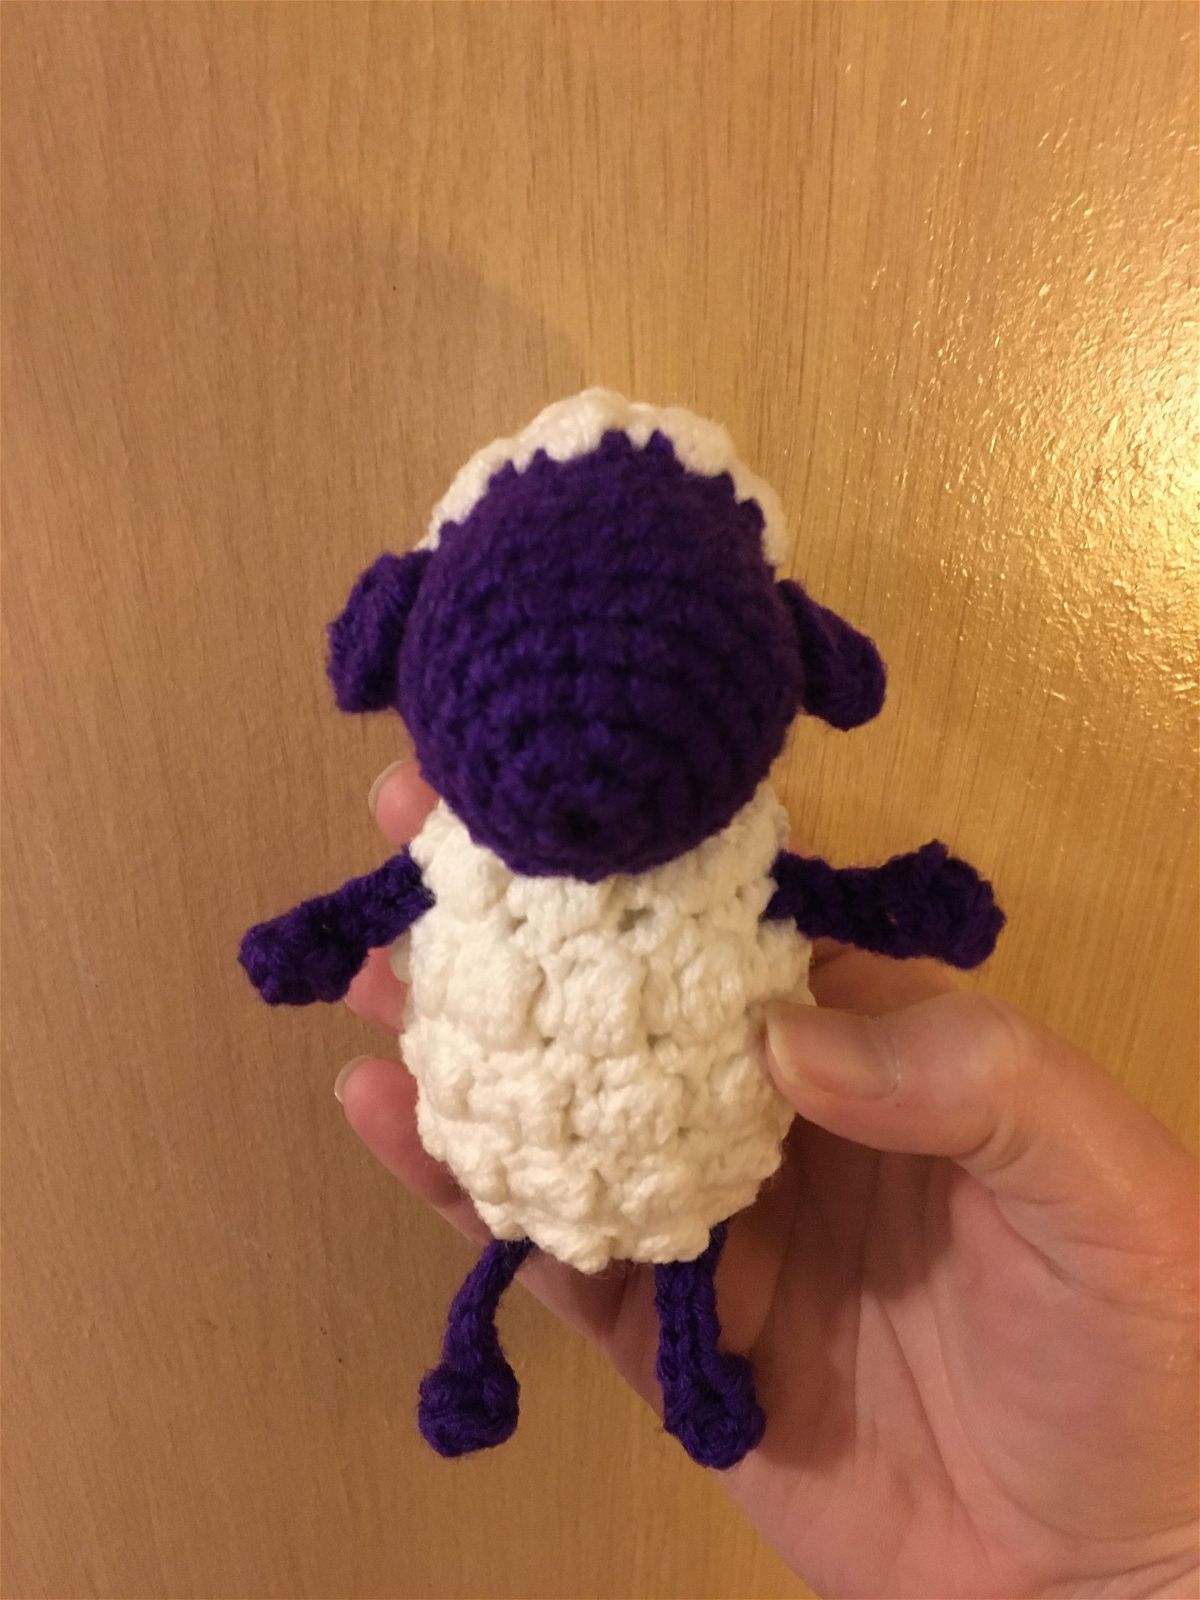 Crochet Sheep Pattern Free Amigurumi Review for Cottontail and Whiskers by Zoe